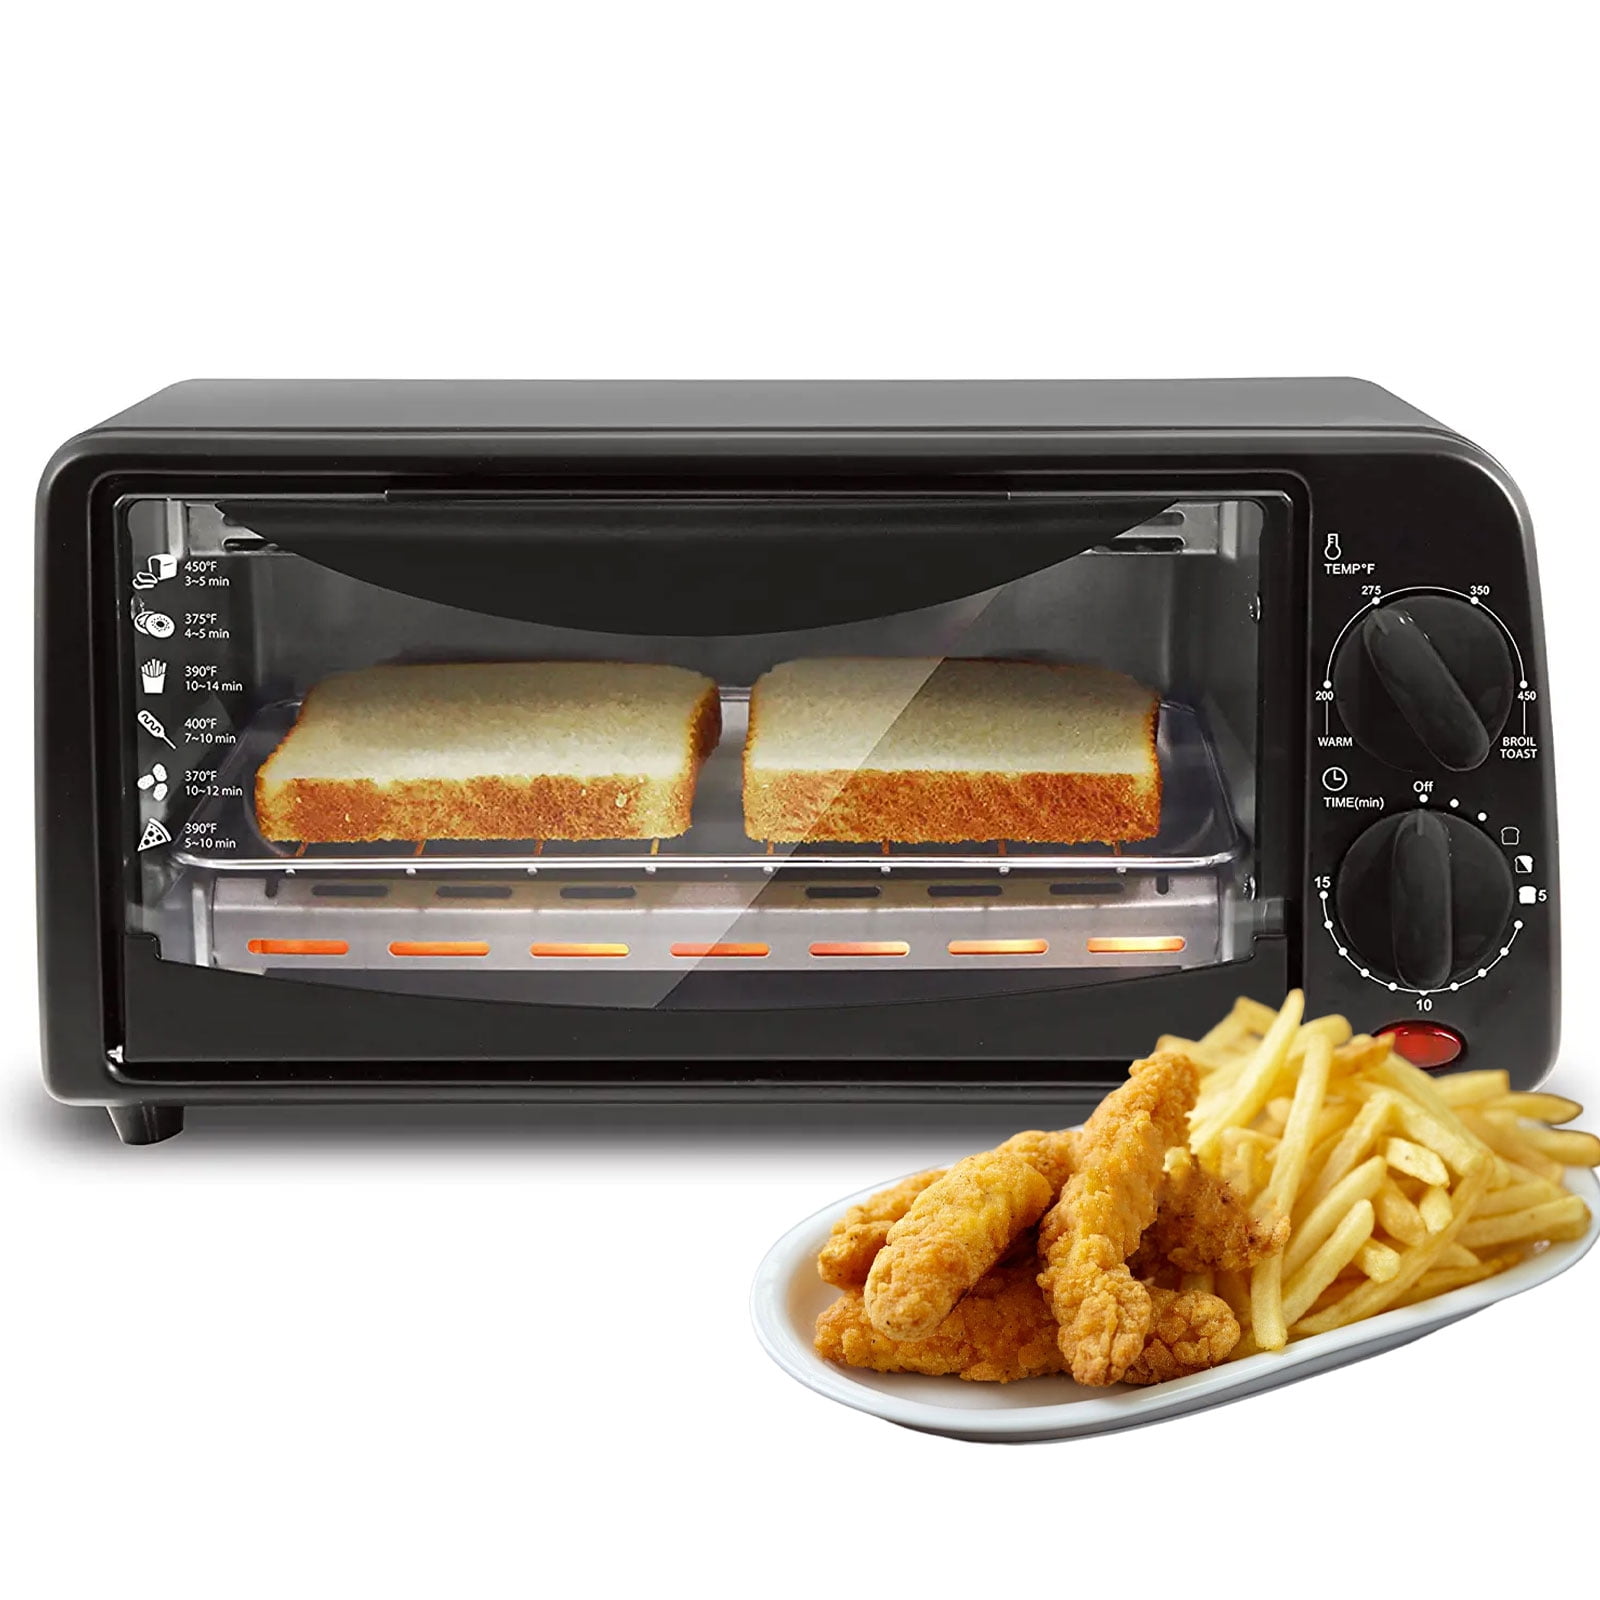 Healsmart Toaster Oven with 20Litres Capacity,Compact Size Countertop  Toaster, Easy to Control with Timer-Bake-Broil-Toast Setting, 1200W,  Stainless